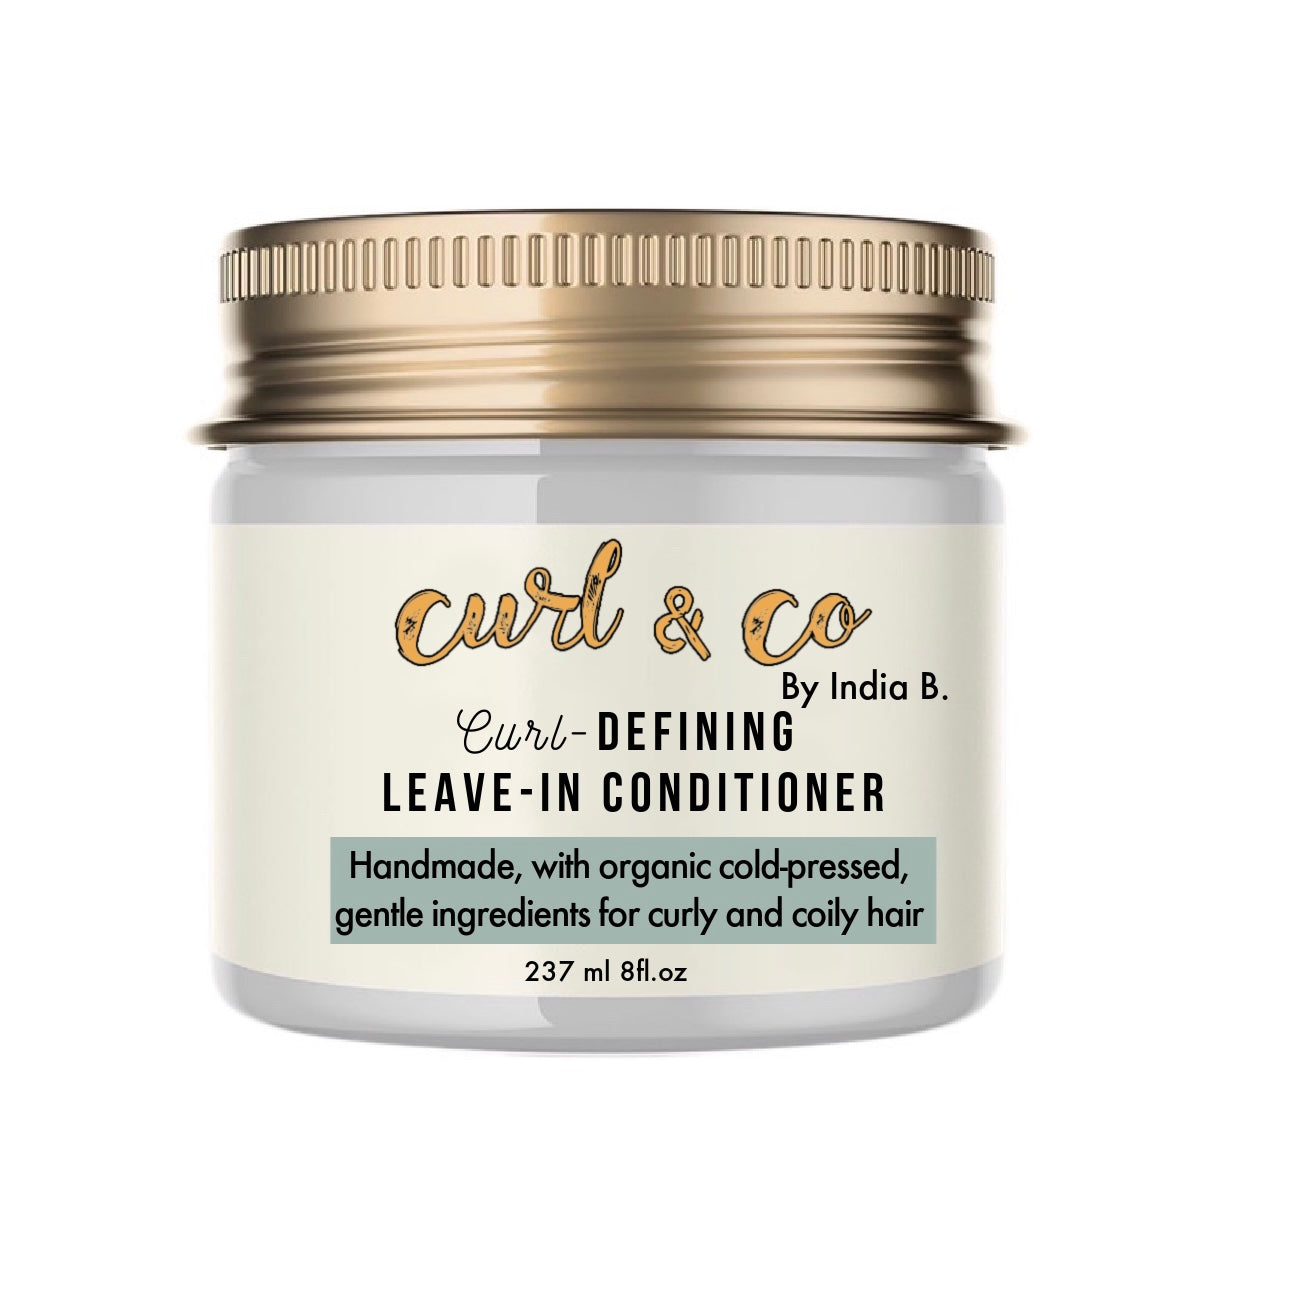 Curl & Co Curl-Defining Leave-In Conditioner